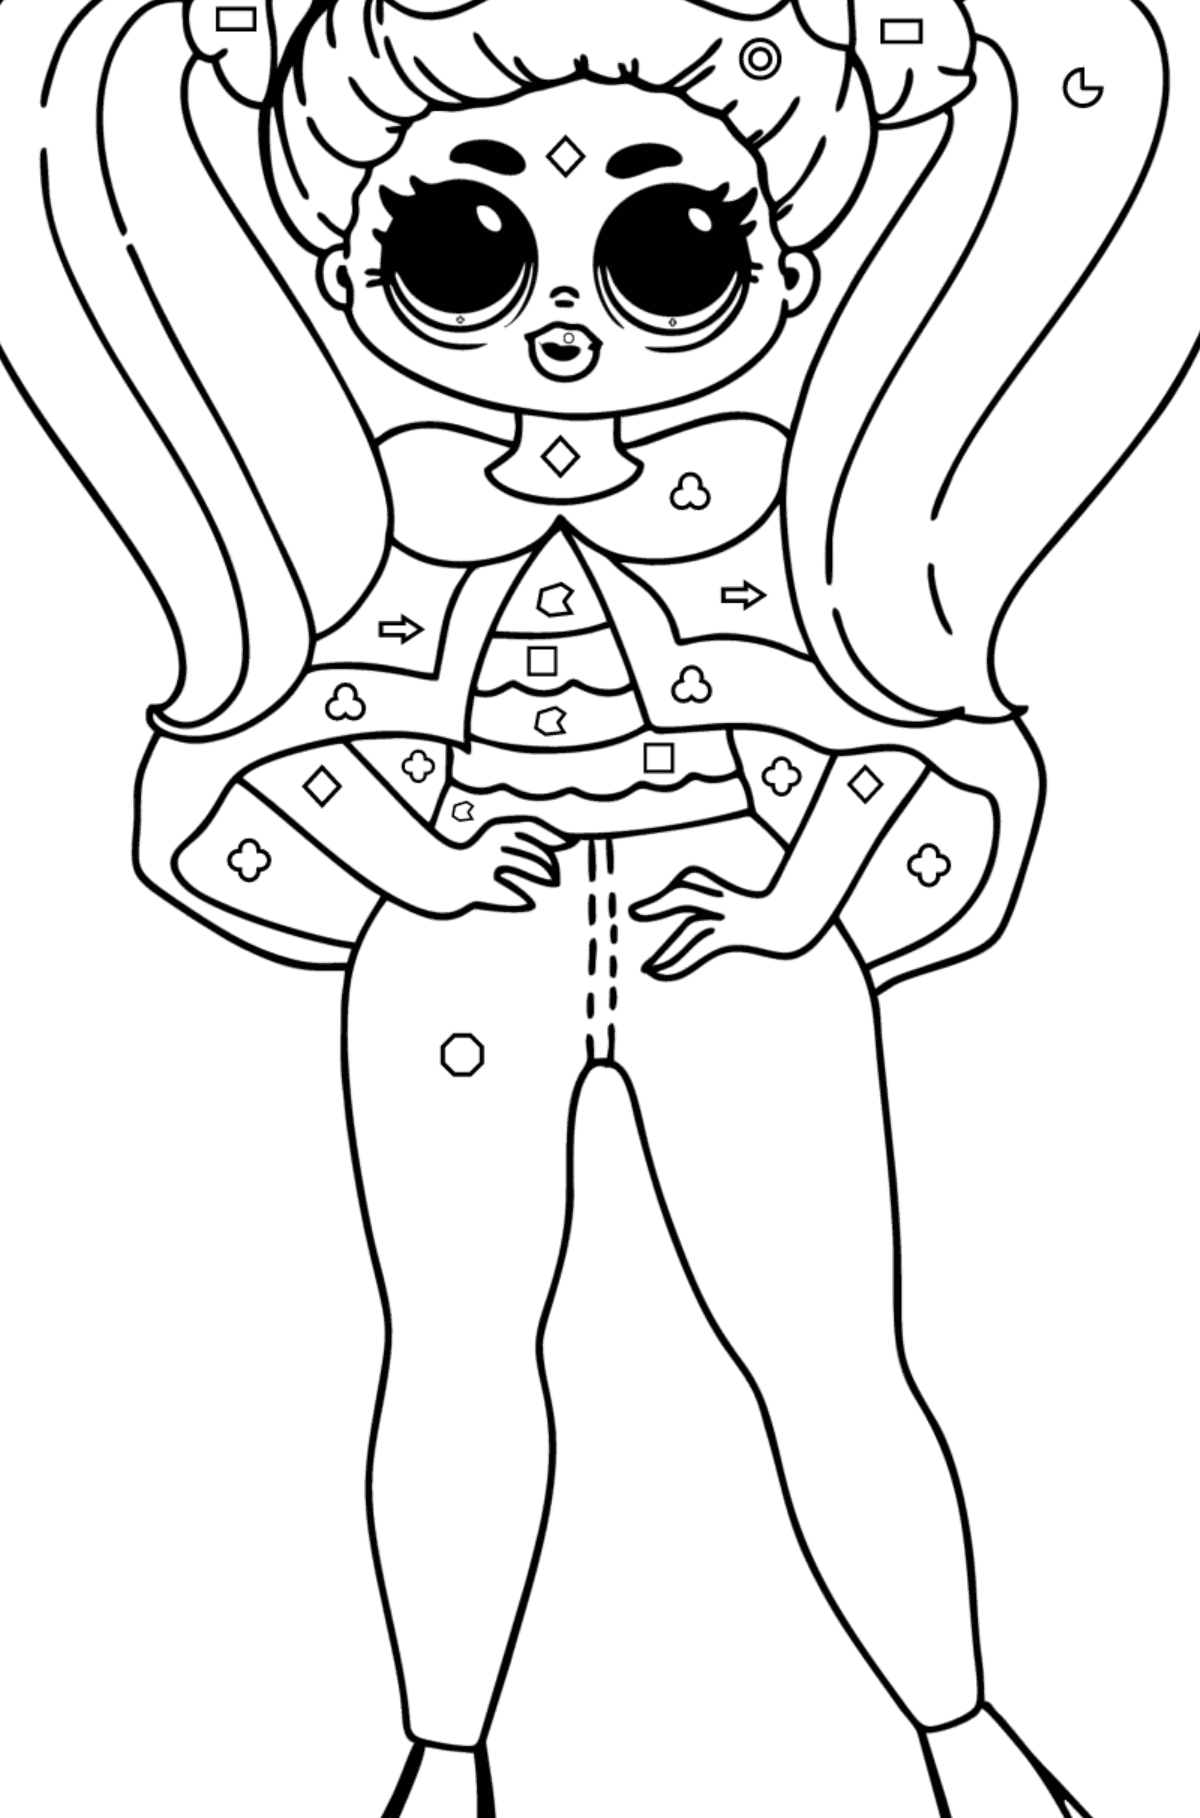 Coloring page LOL Surprise OMG - Coloring by Geometric Shapes for Kids